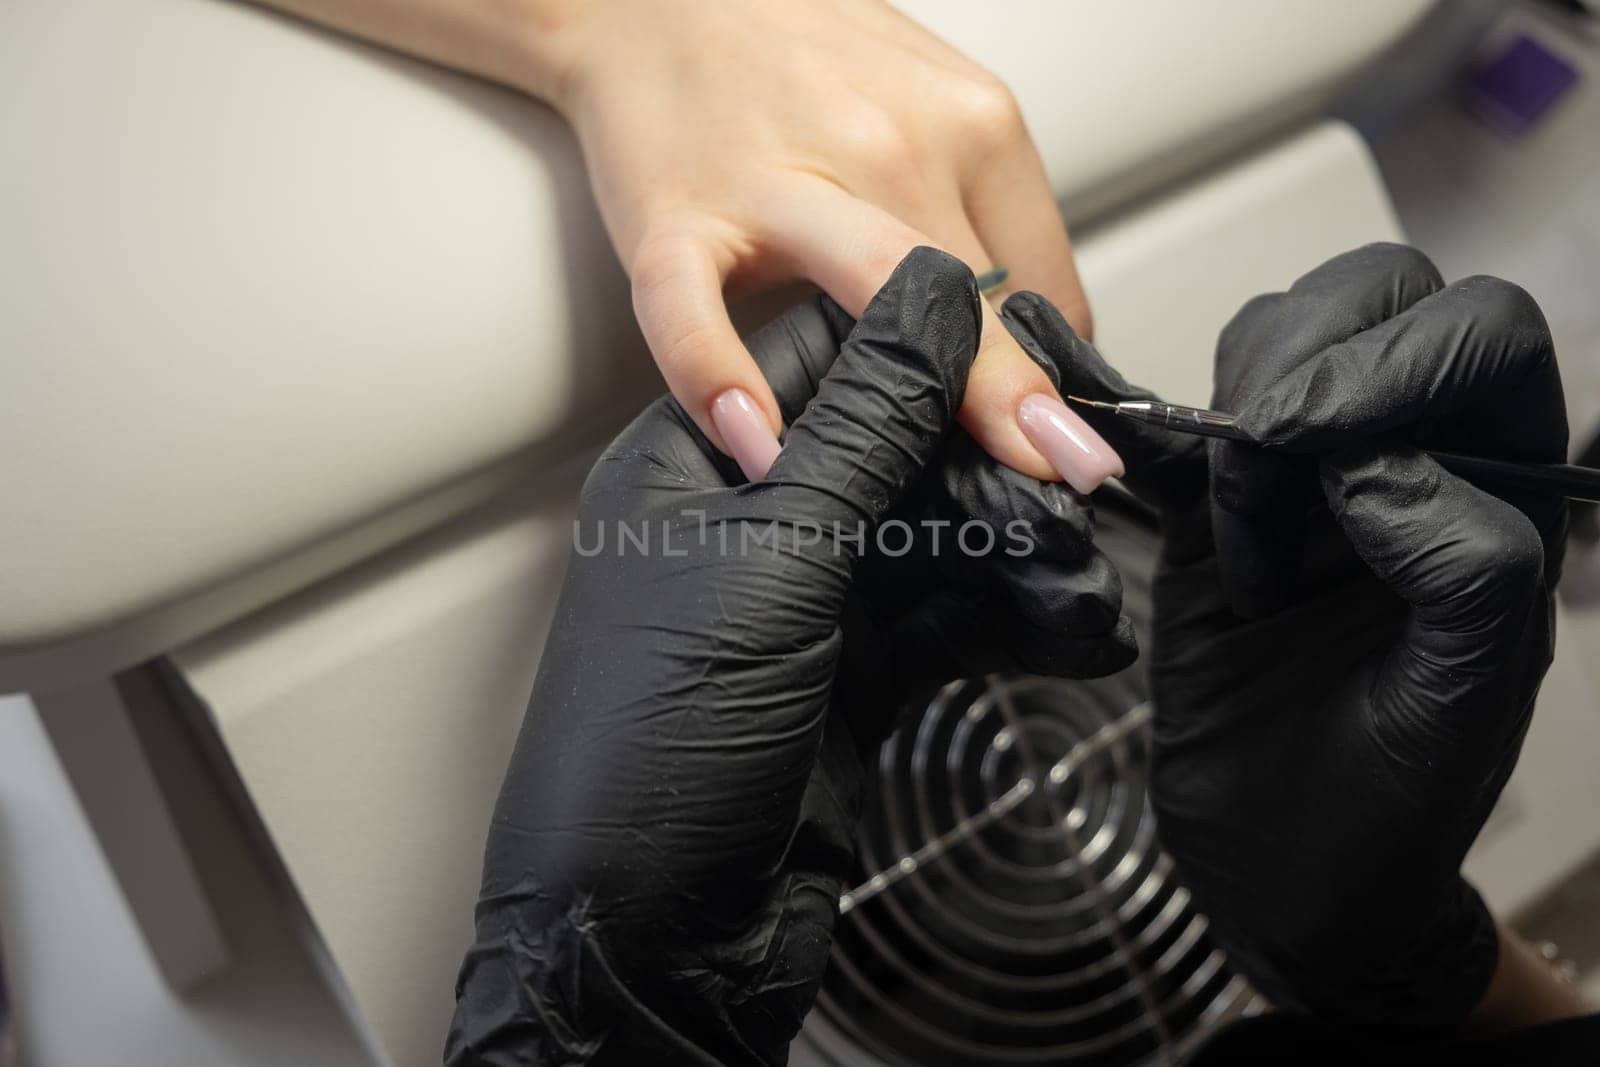 Female hands and tools for manicure, process of performing manicure in beauty salon. Nail care procedure in a beauty salon. Gloved hands of an experienced manicurist in gloves are varnished nails